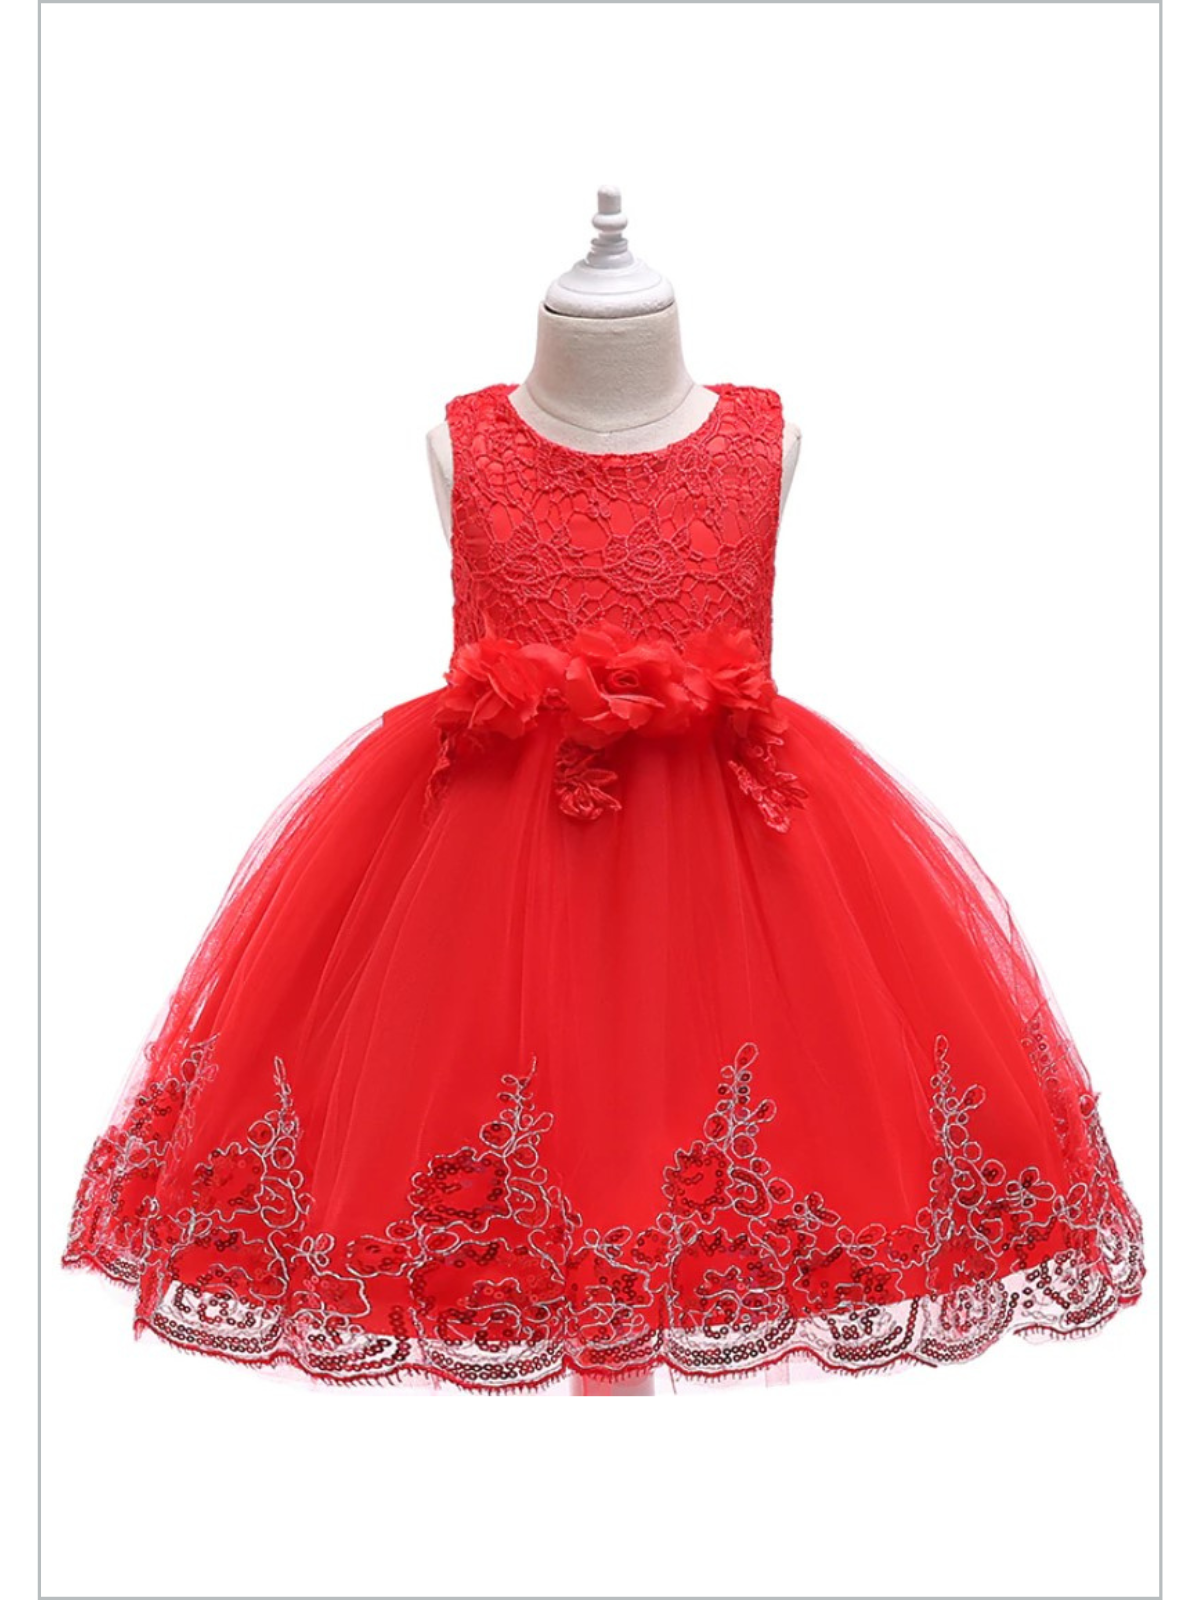 Winter Formal Dresses | Lace Sequin Princess Special Occasion Dress ...